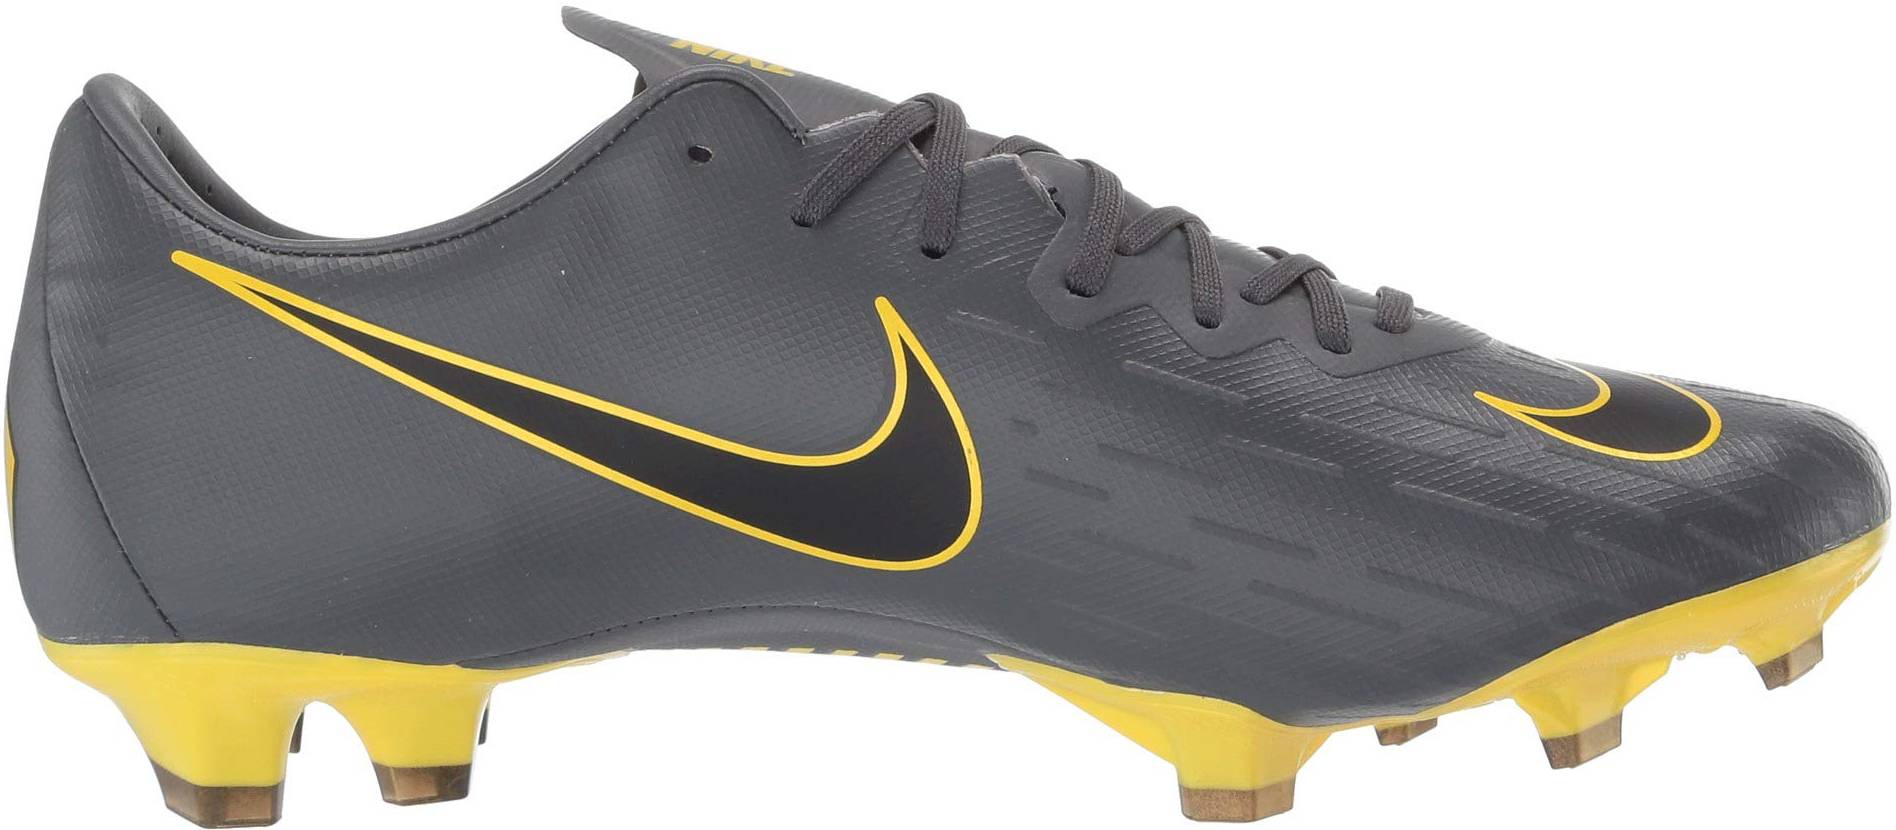 black and yellow youth football cleats